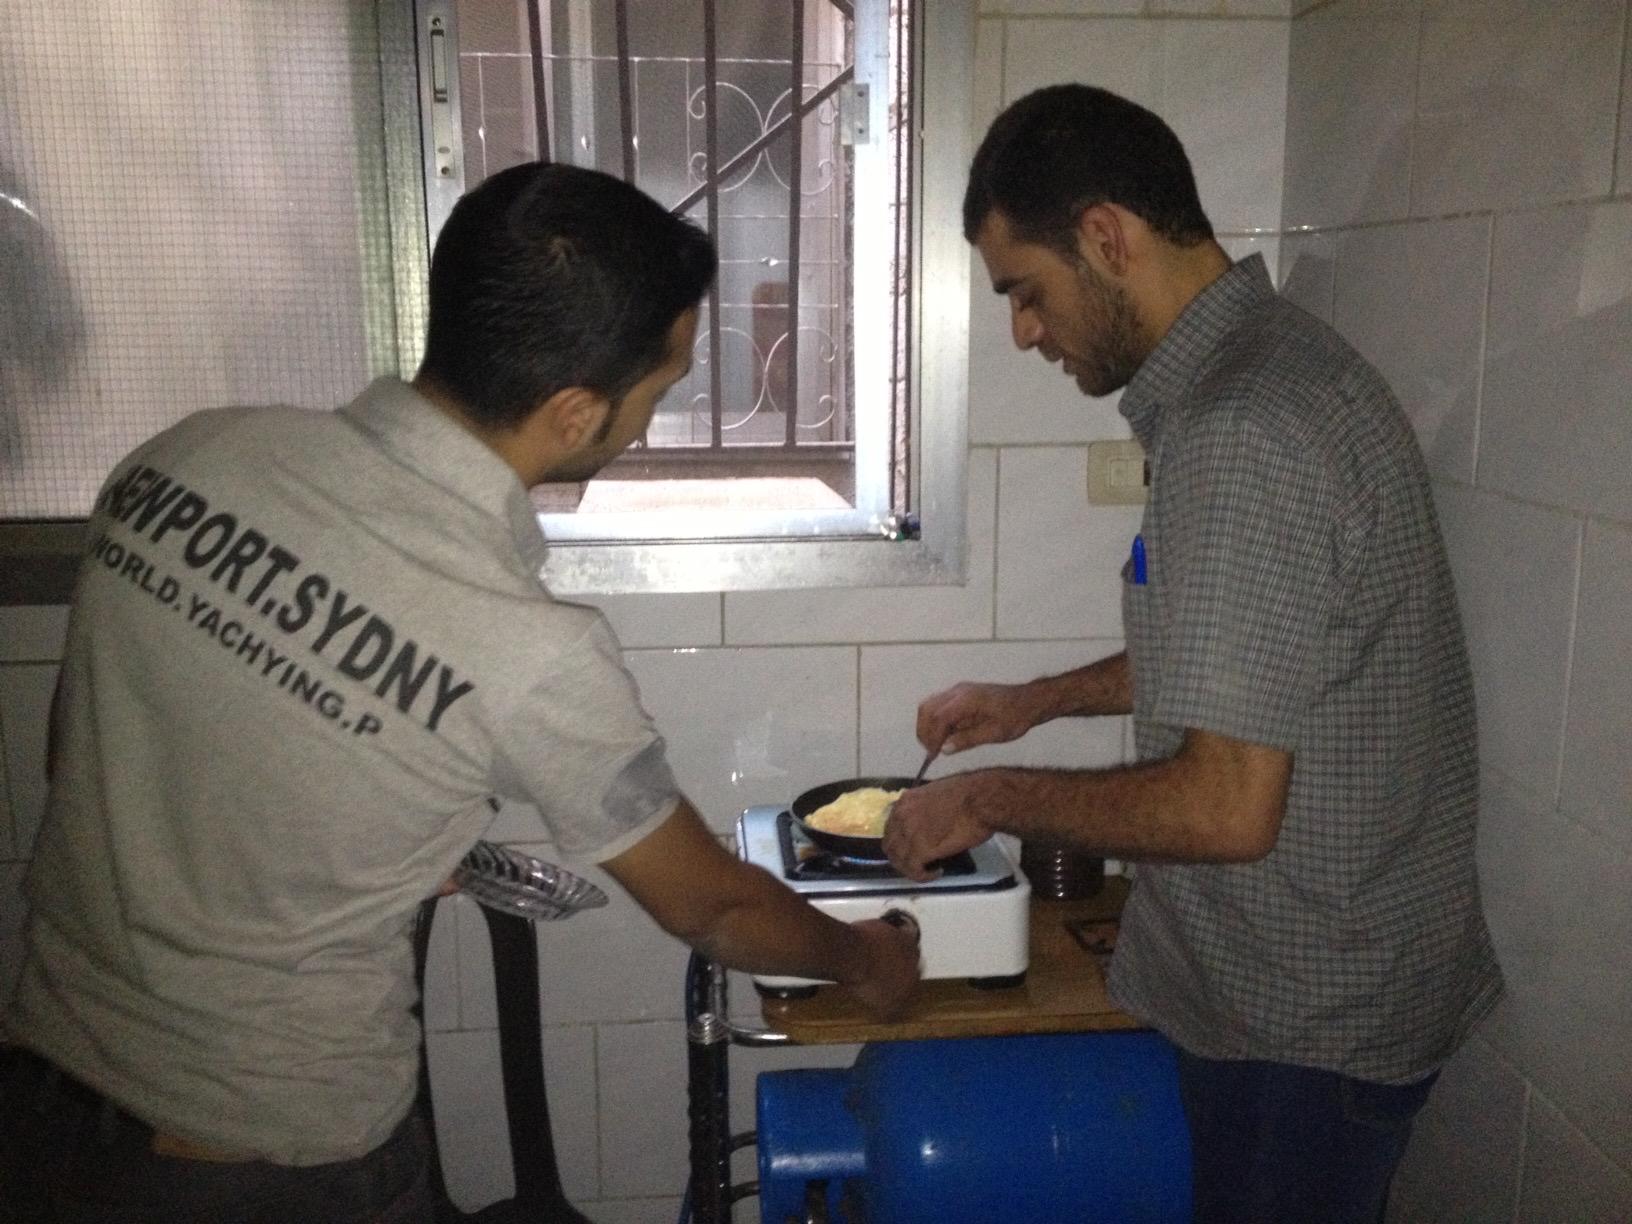 two men standing in a small, dark kitchen making eggs on a hotplate